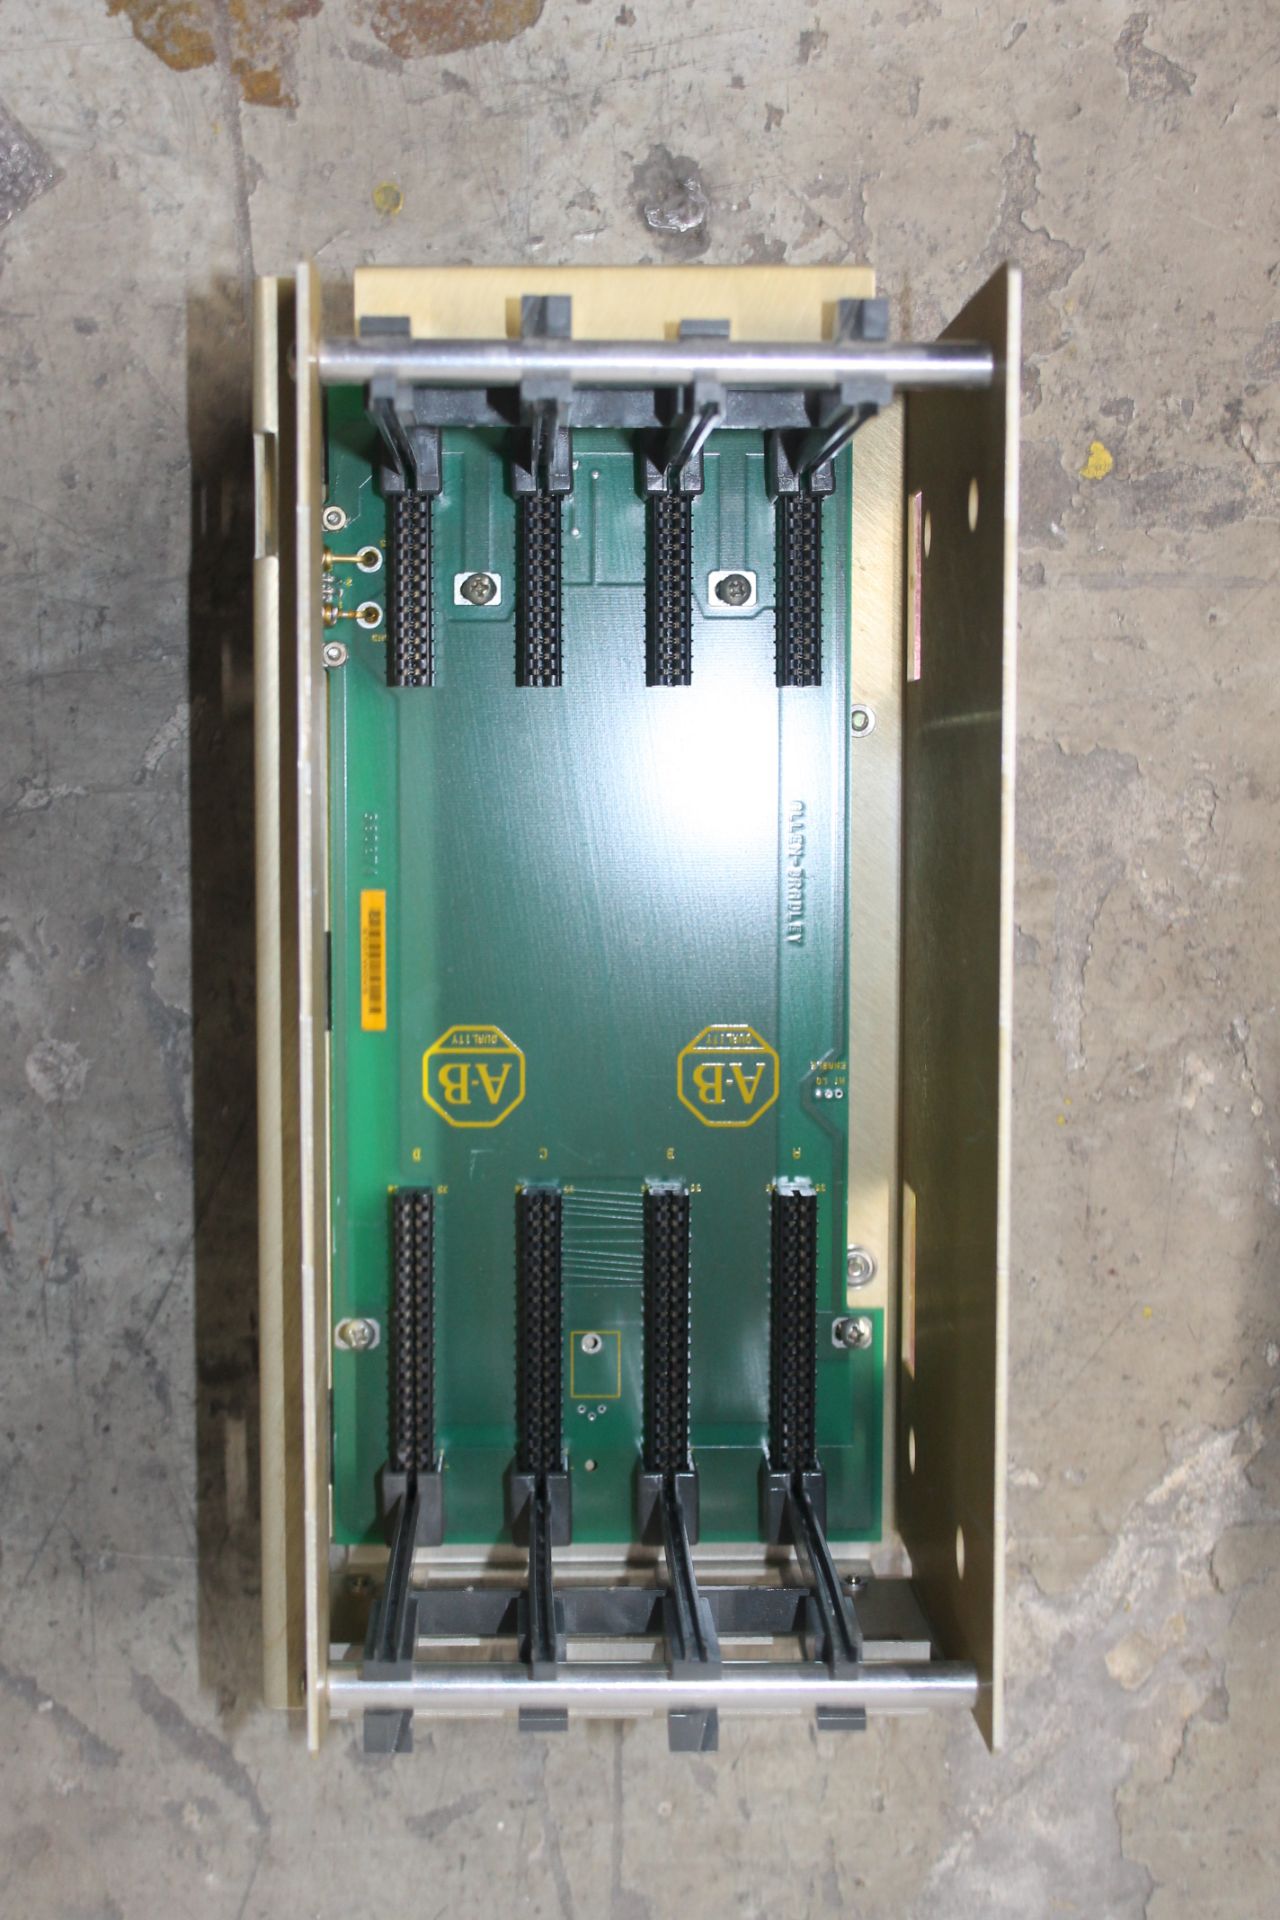 ALLEN BRADLEY 1771-PSC POWER SUPPLY CHASSIS - Image 2 of 3